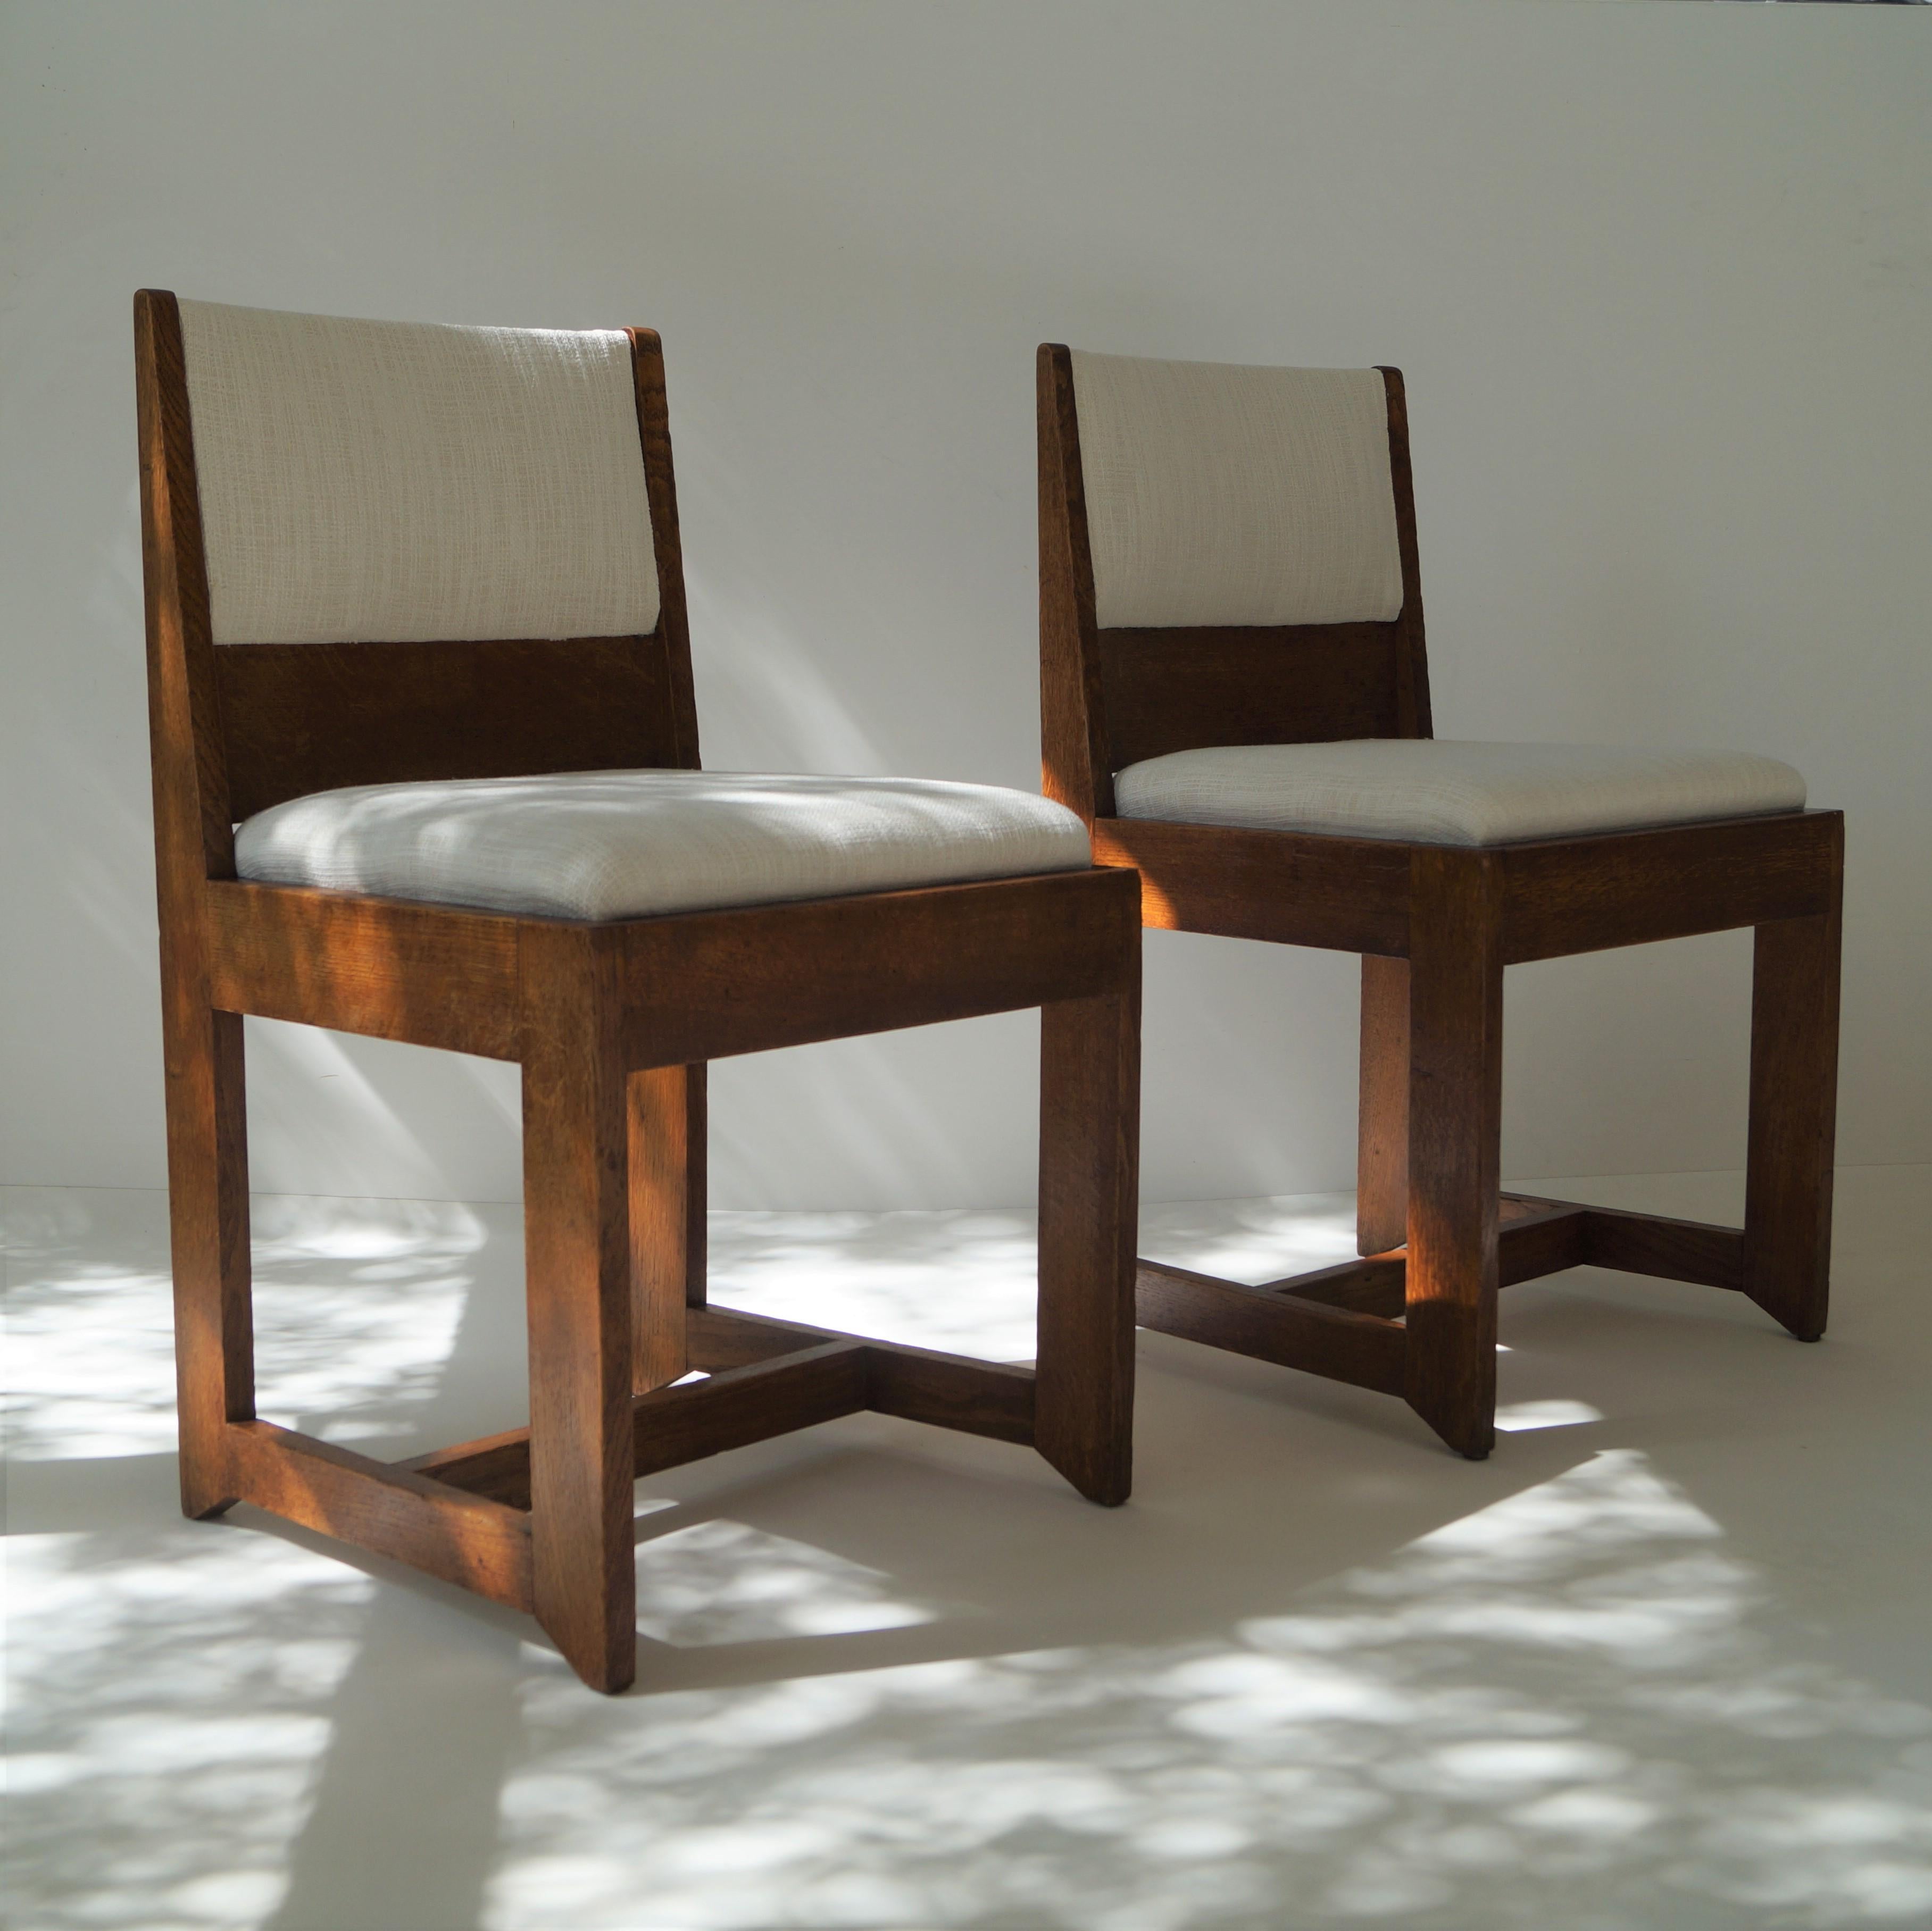 Dutch Art Deco Modernist set of chairs by H. Wouda for Pander, 1924 For Sale 7